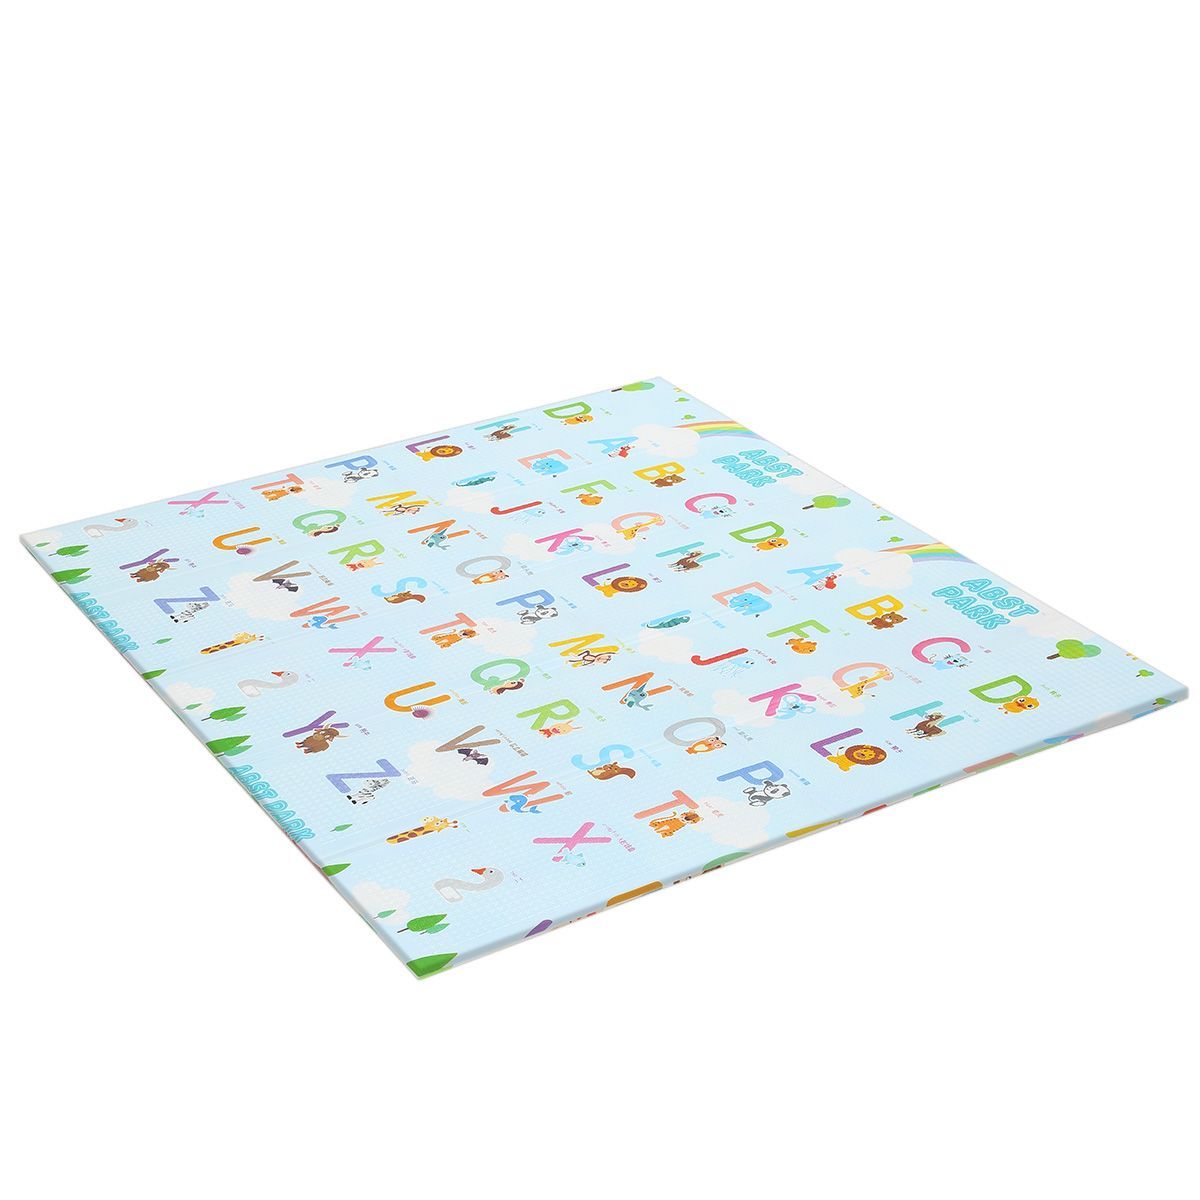 big play mat for baby